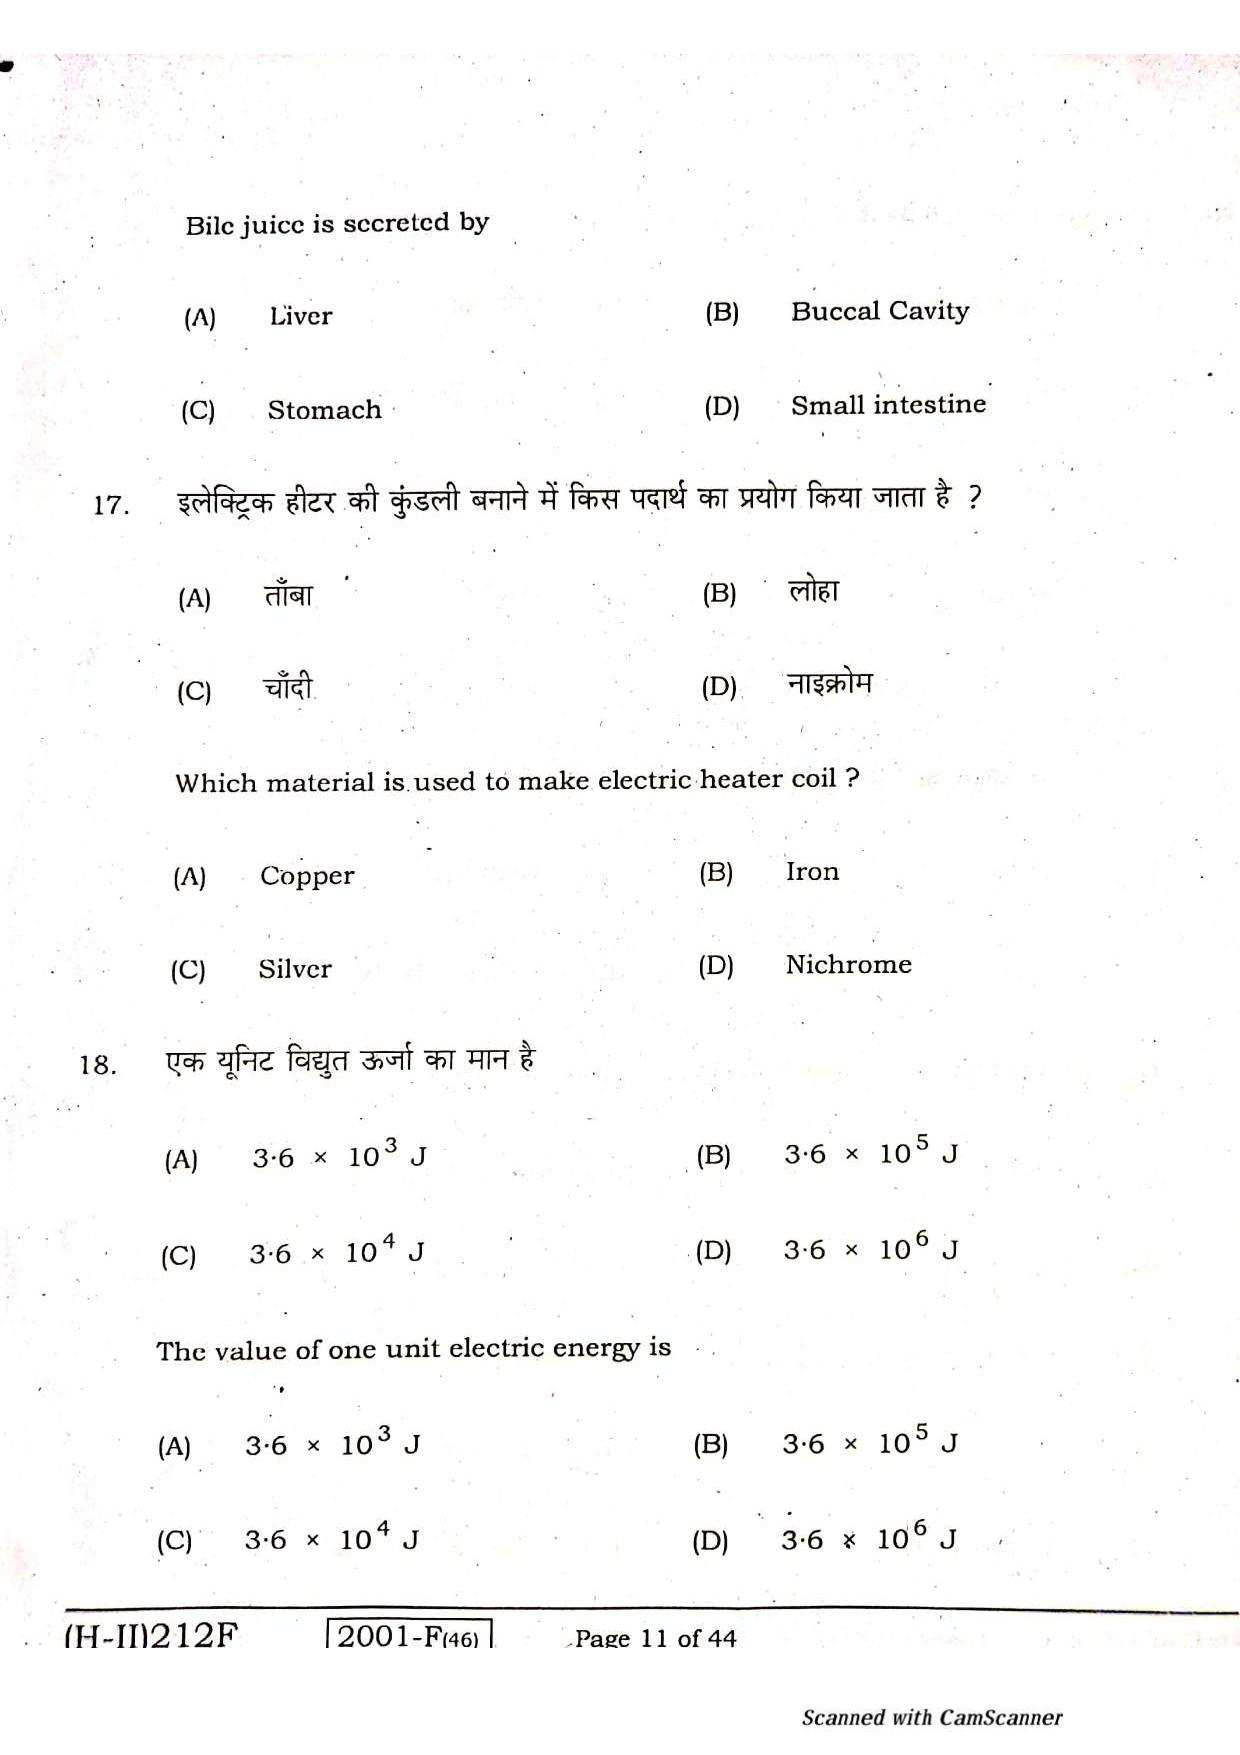 Bihar Board Class 10 Science 2021 (2nd Sitting) Question Paper - Page 9